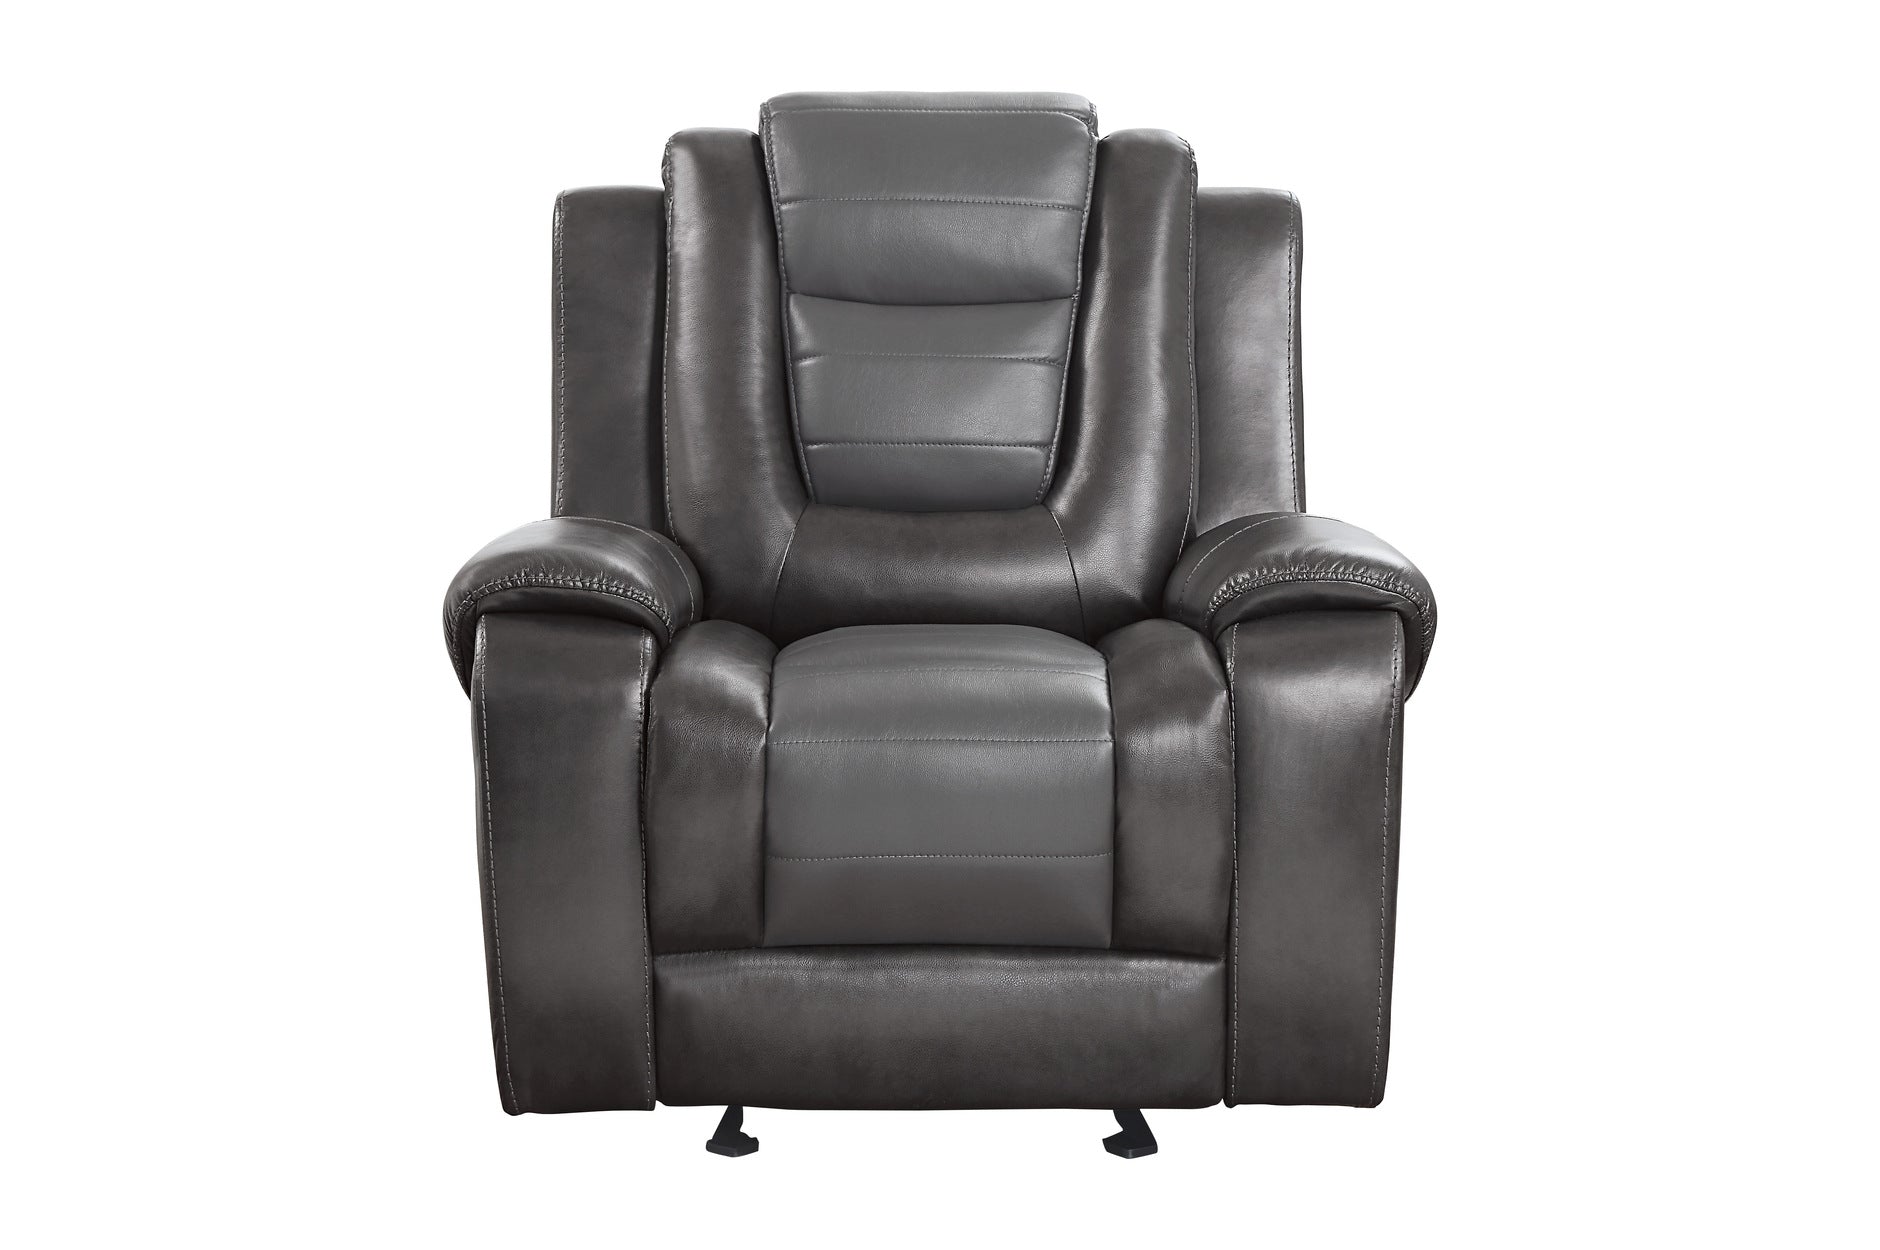 Briscoe Gray Reclining Living Room Set - SET | 9470GY-1 | 9470GY-2 | 9470GY-3 - Bien Home Furniture &amp; Electronics